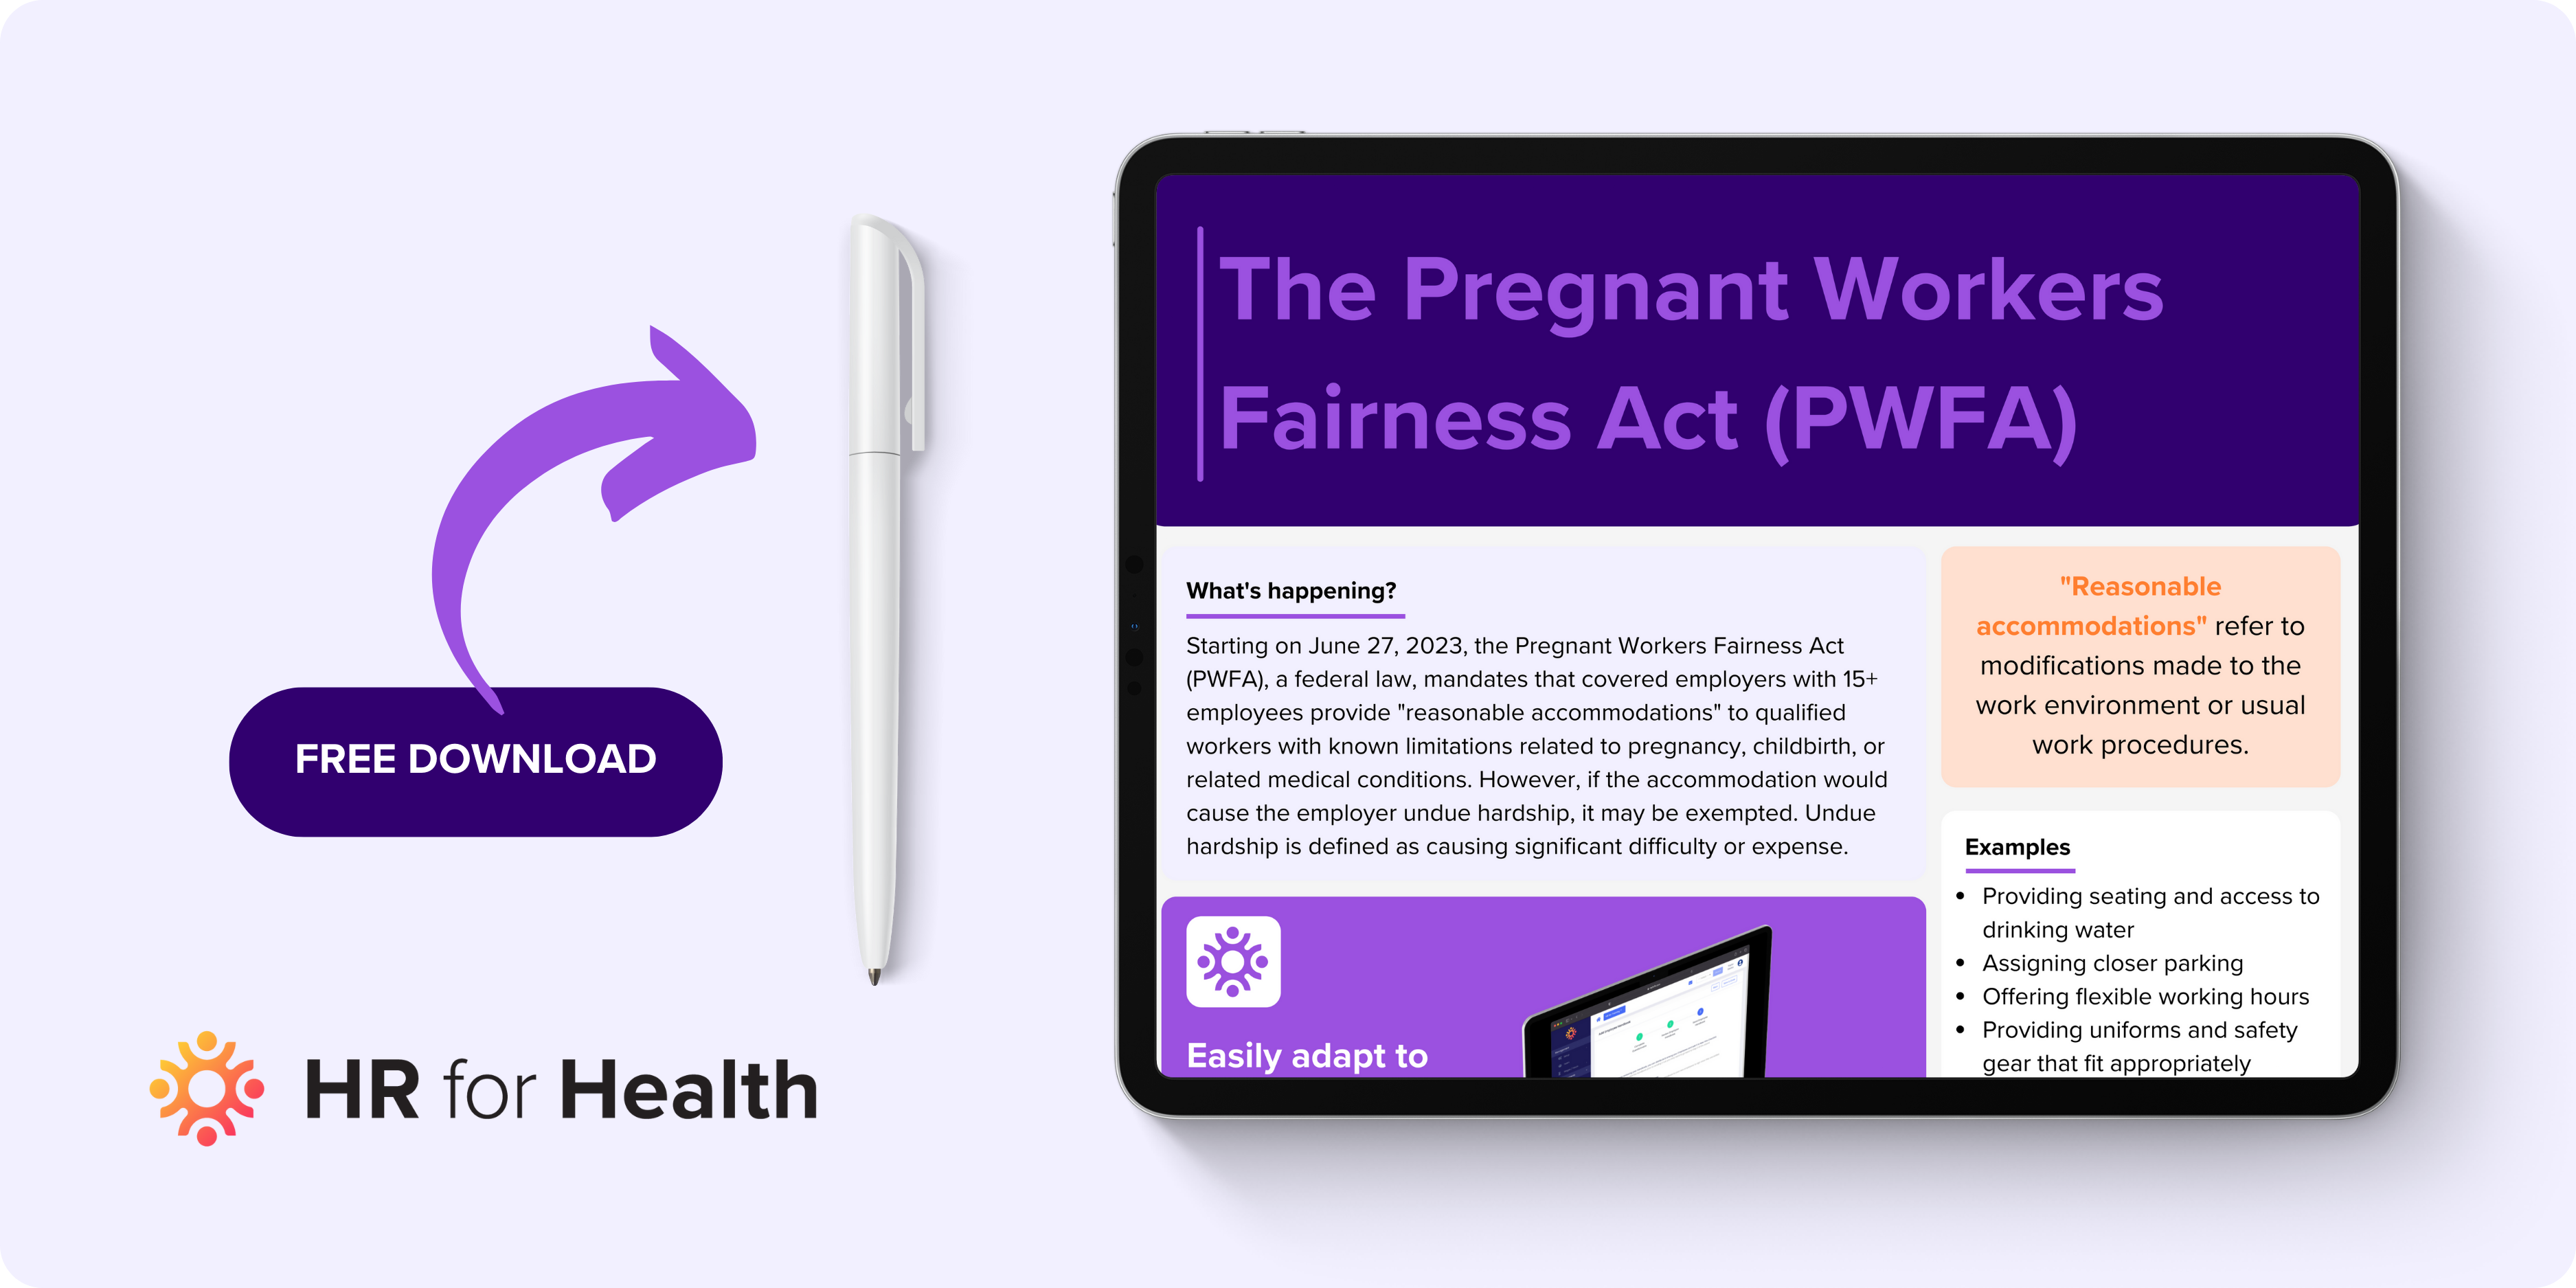 Two laws provide greater accommodations for pregnant and nursing